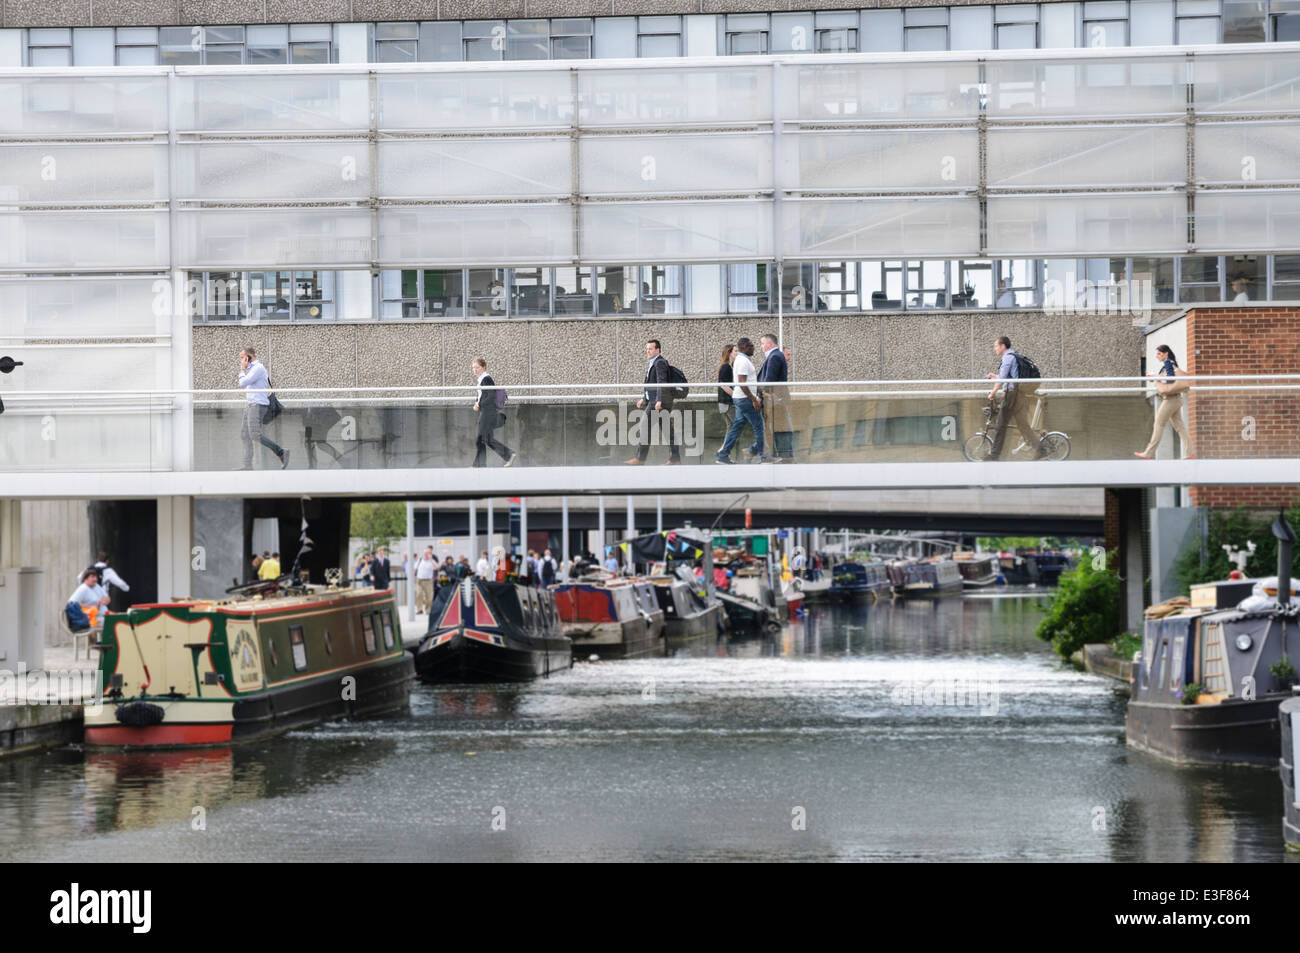 Workers rush to/from work while people in canal boats relax on the river at Paddington Basin Stock Photo